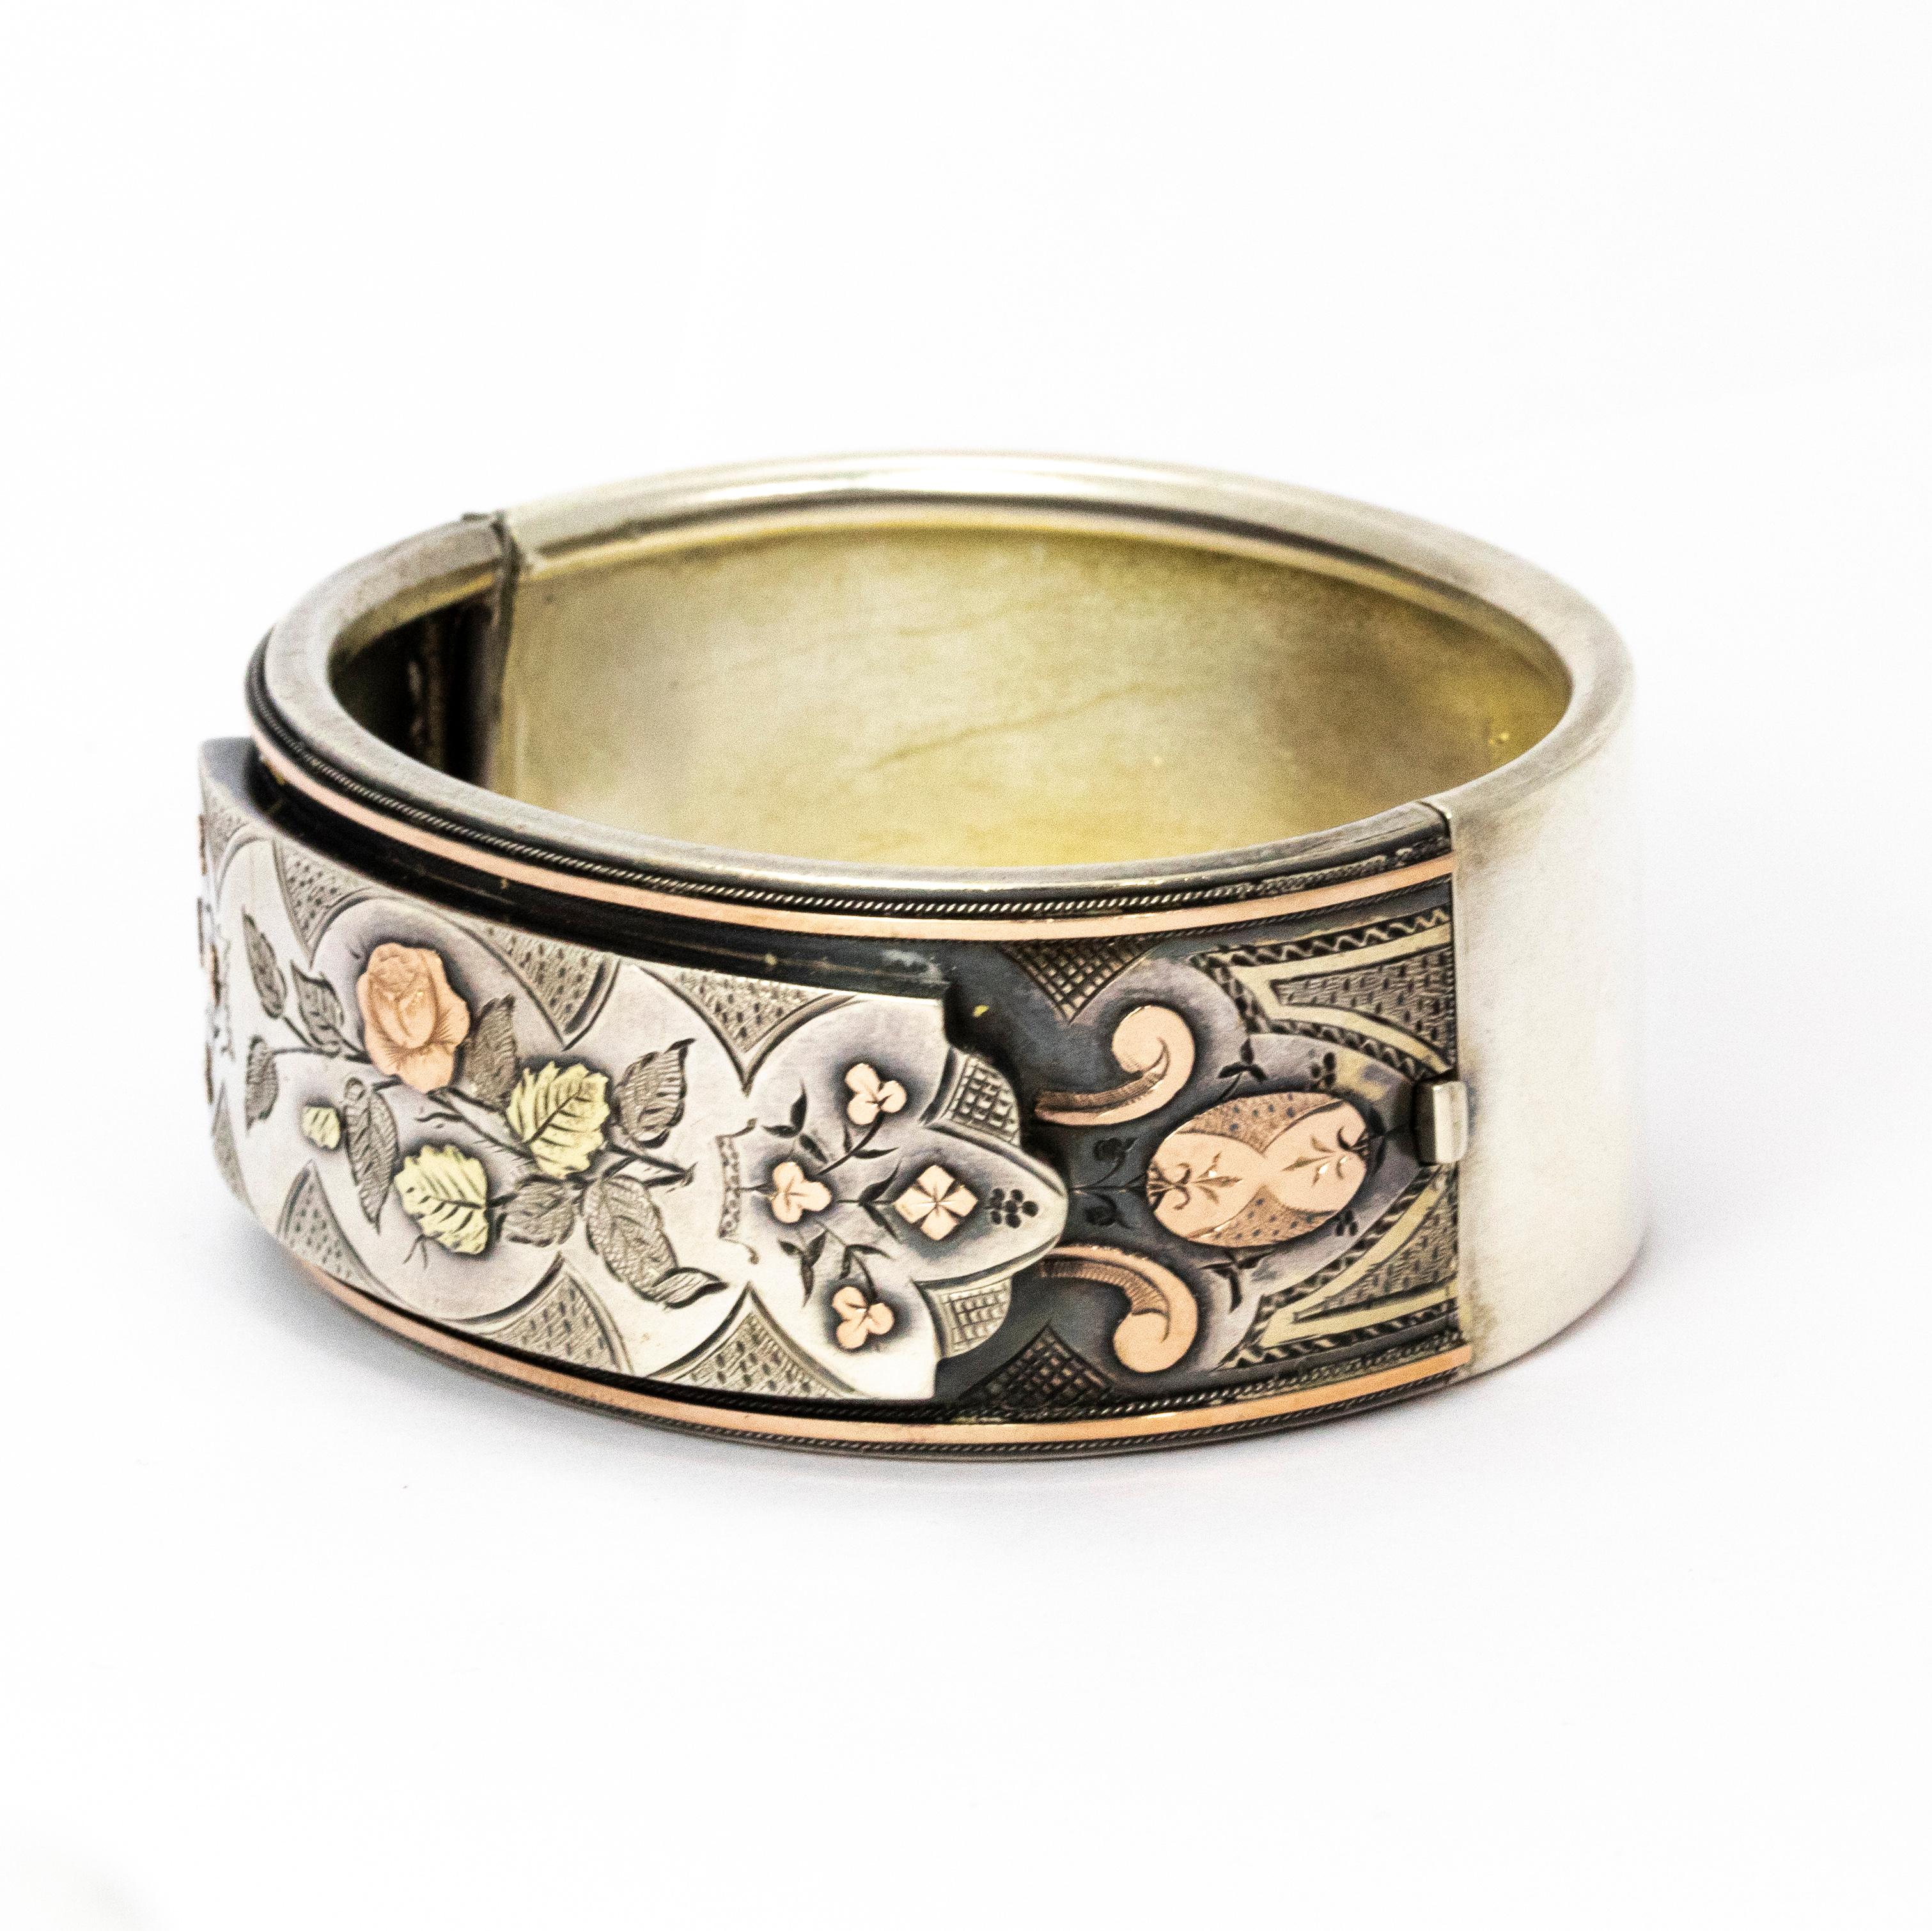 A brilliant antique Victorian bangle. It is meticulously engraved with a foliate scene of leaves and flowers, parts of the design are finely set with two tones of gold overlay. Modelled in silver.

Diameter: 6.2cm (from hinge to clasp)
Height: 2.5cm